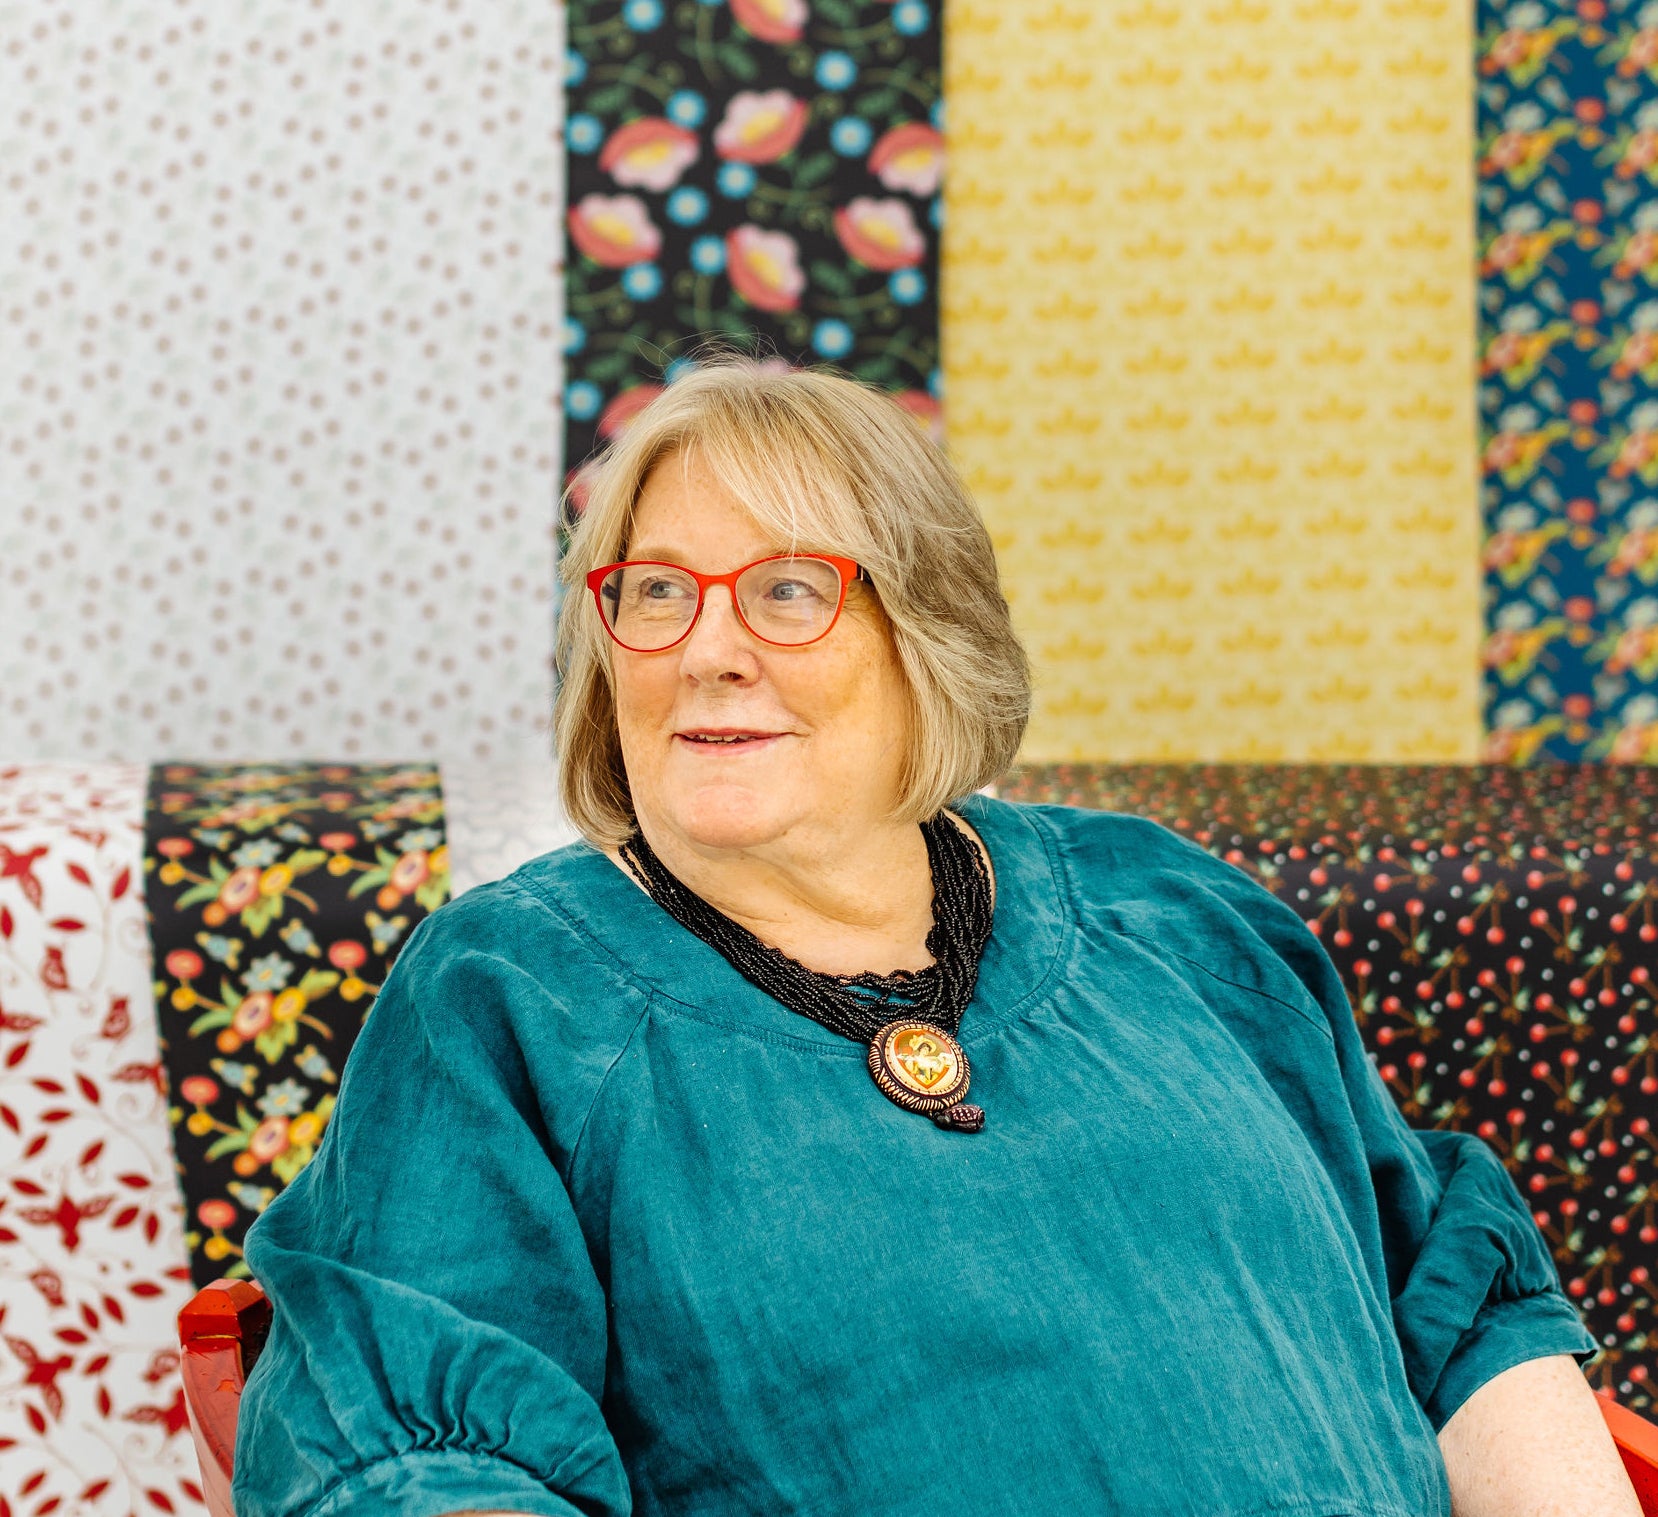 Renowned illustrator Mary Engelbreit partners with St. Louis company to debut a wallpaper line